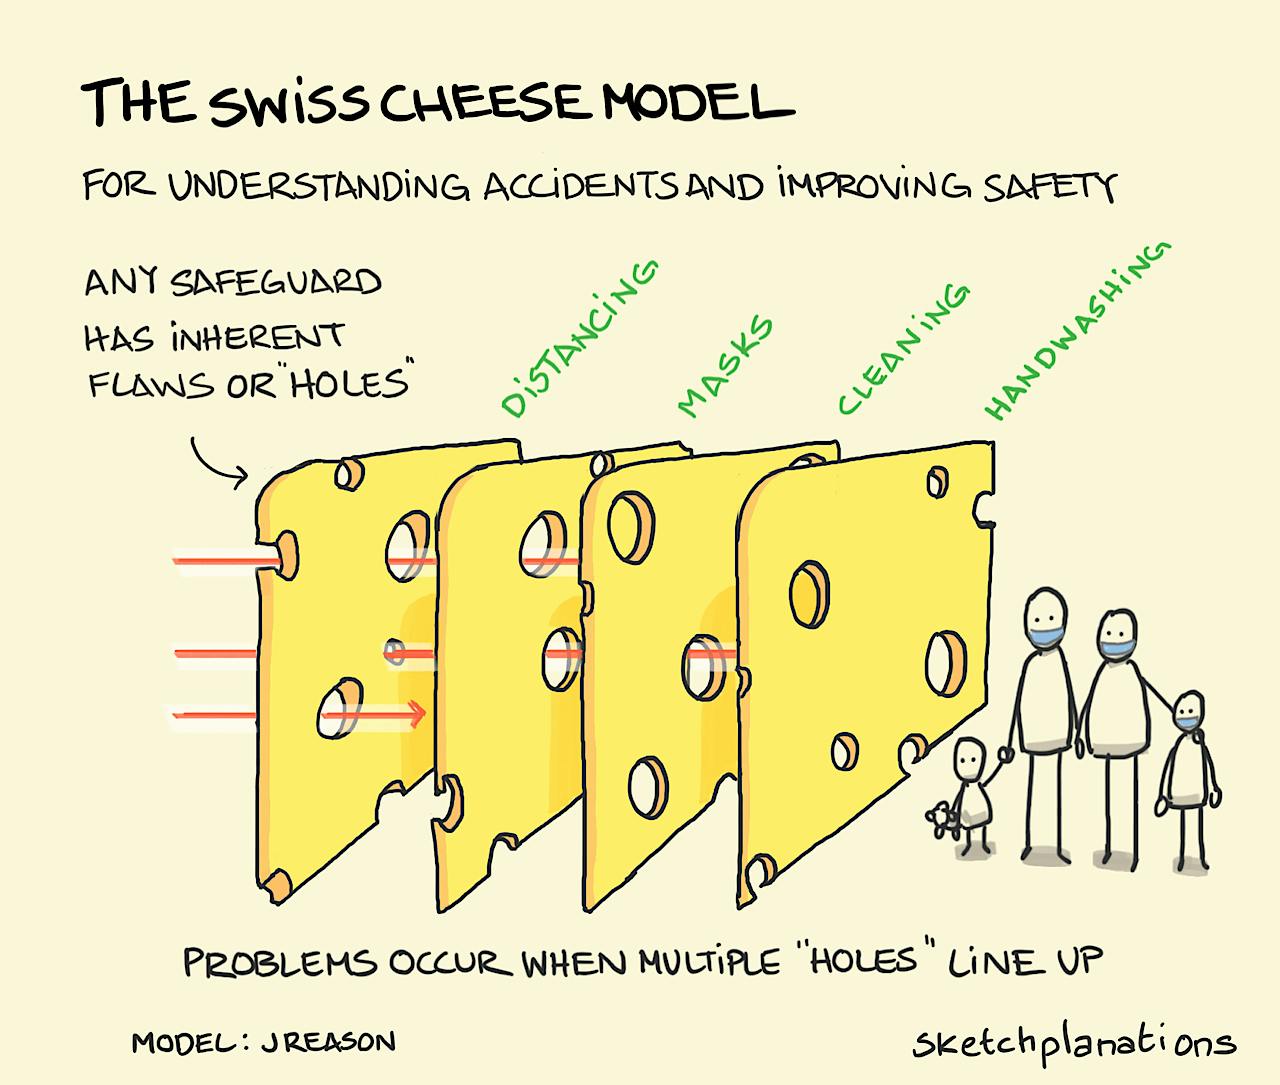 The Swiss Cheese Model - Sketchplanations